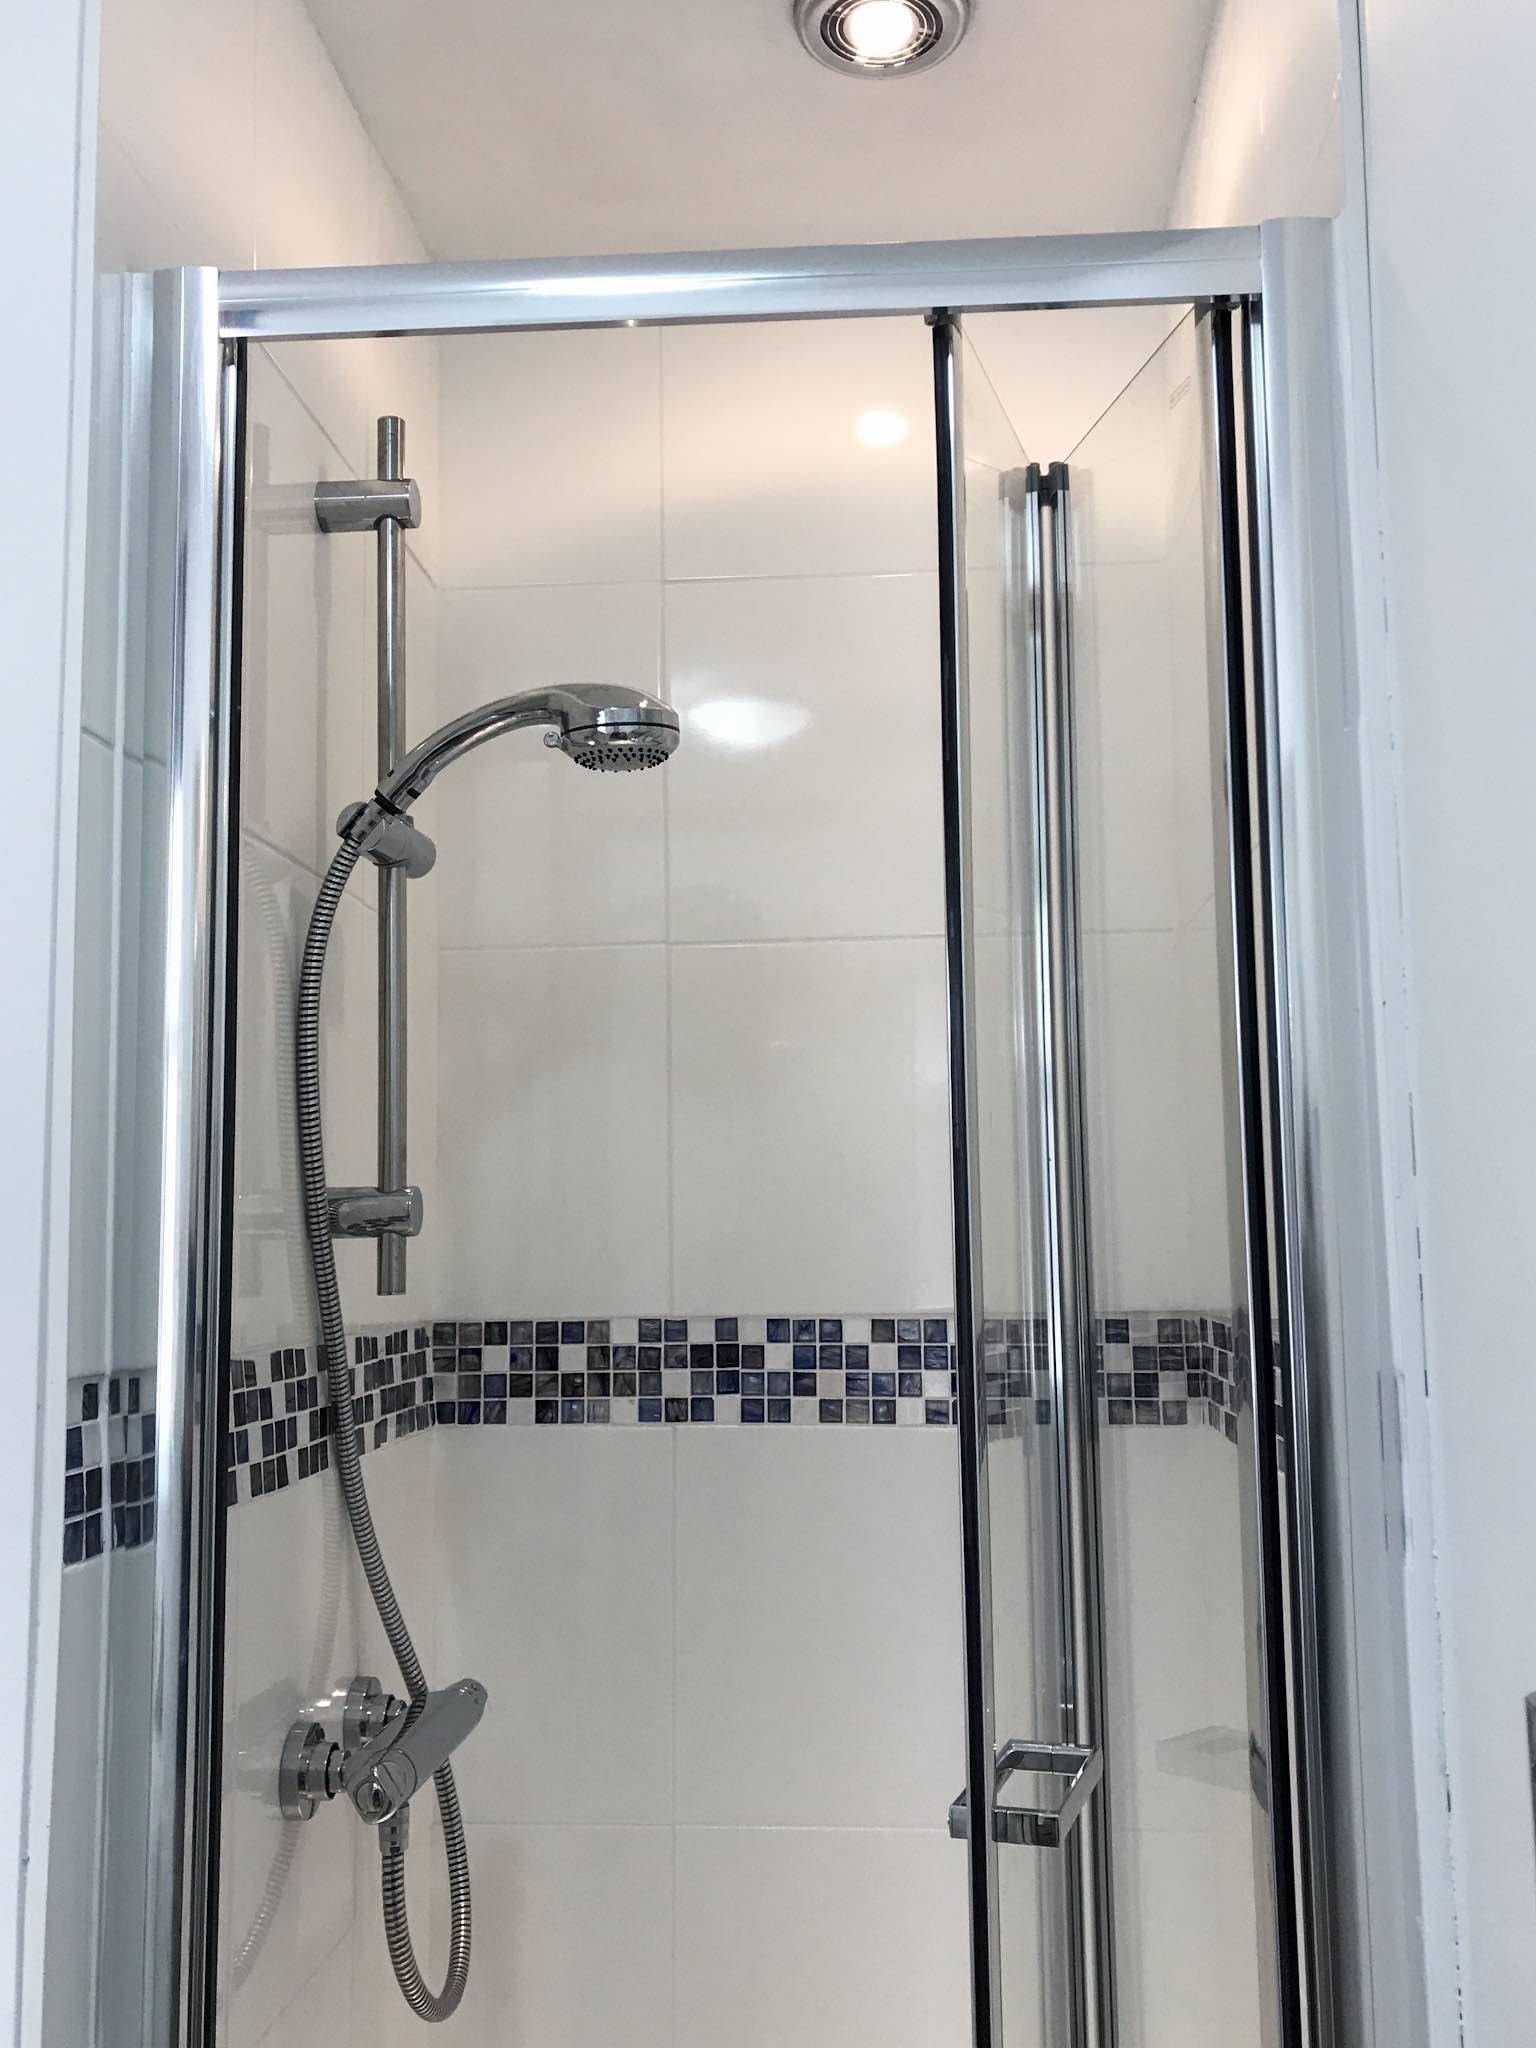 Shower in the small bathroom